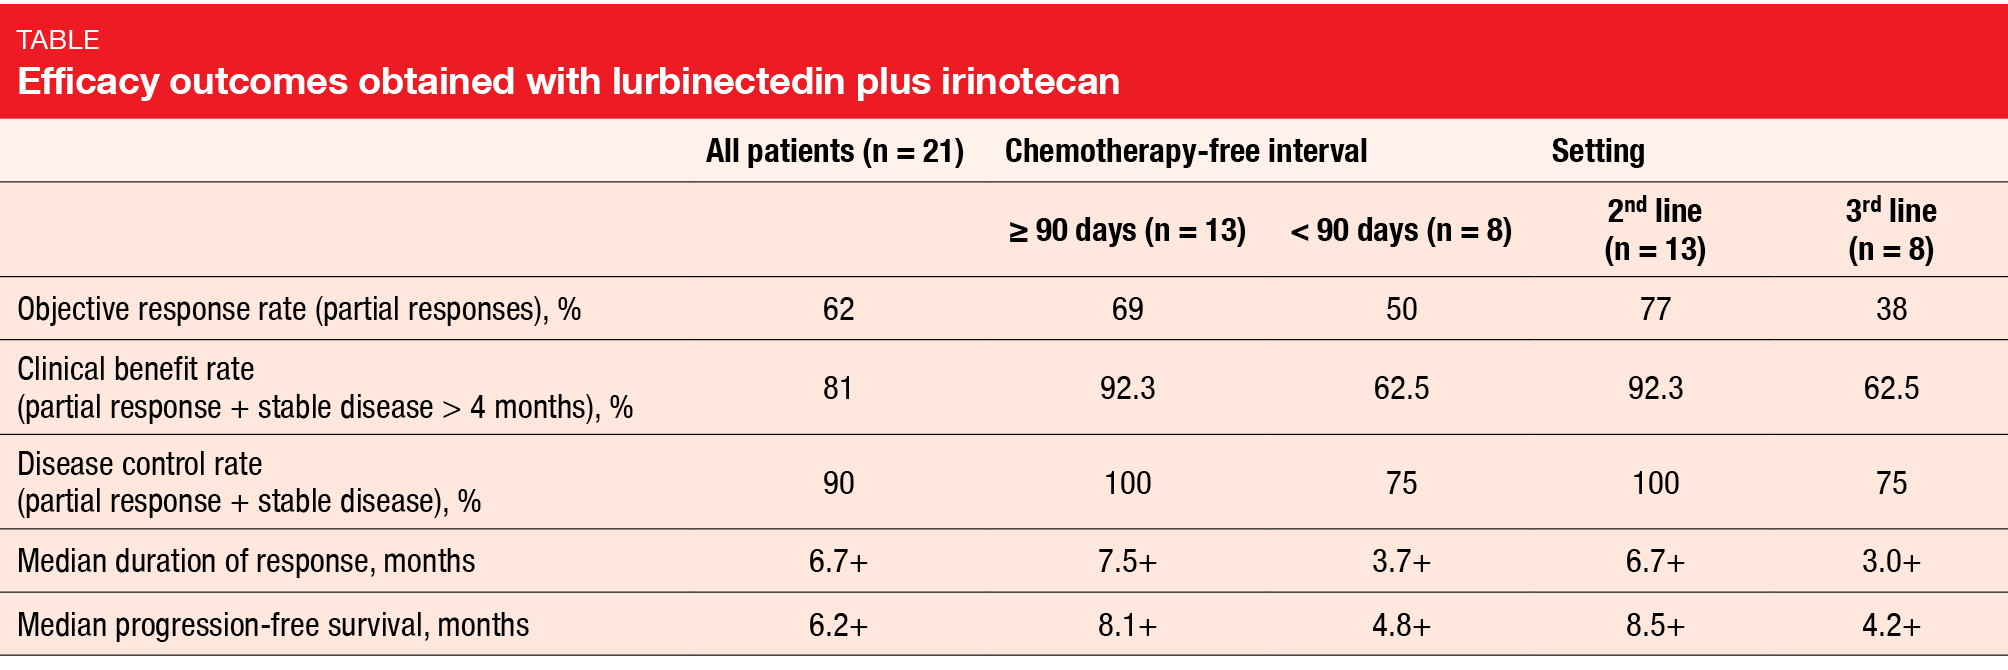 Table: Efficacy outcomes obtained with lurbinectedin plus irinotecan